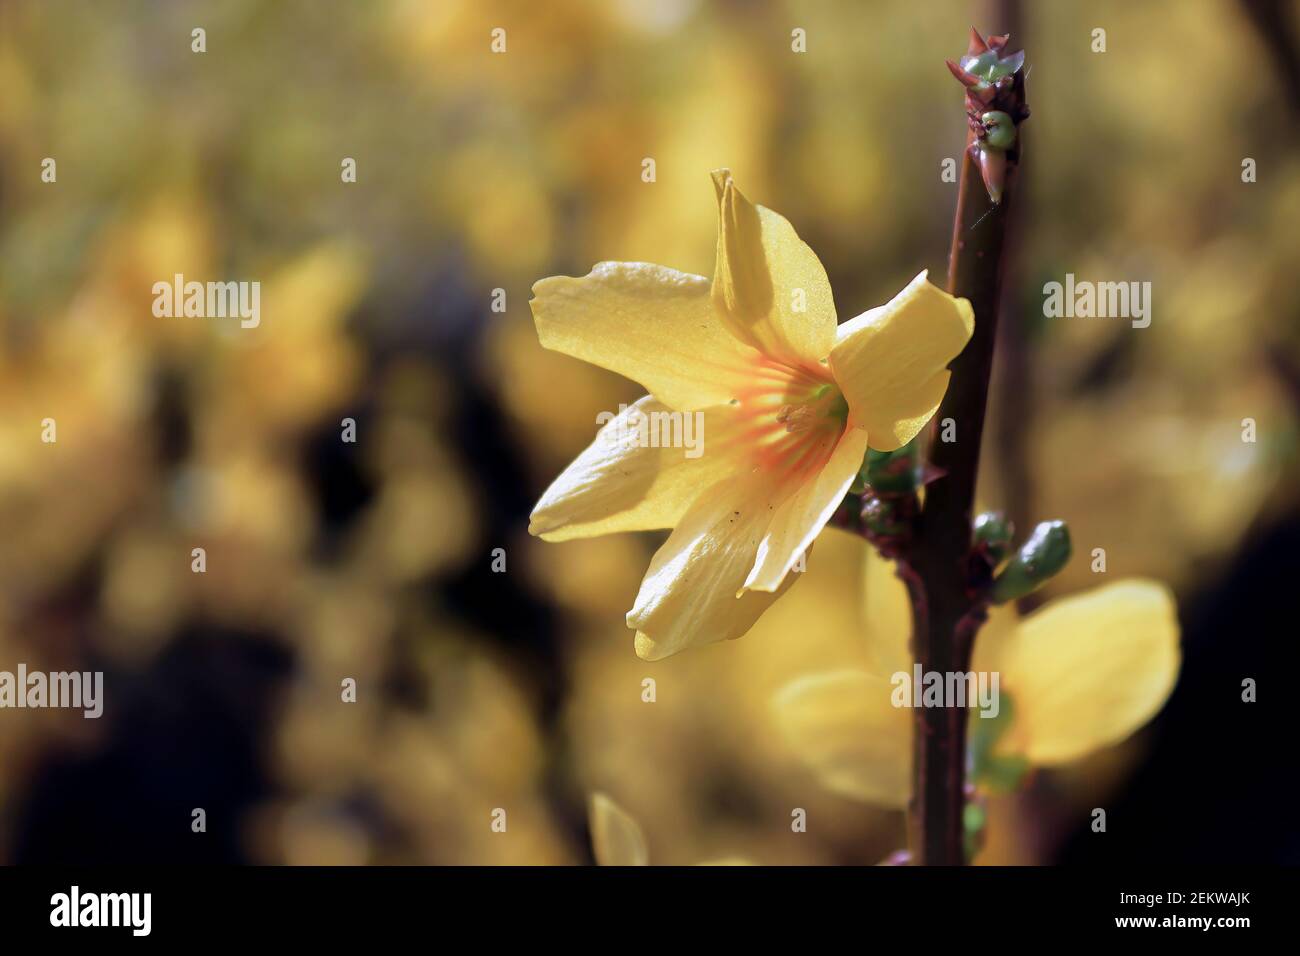 A golden flower on a forsythia in spring Stock Photo